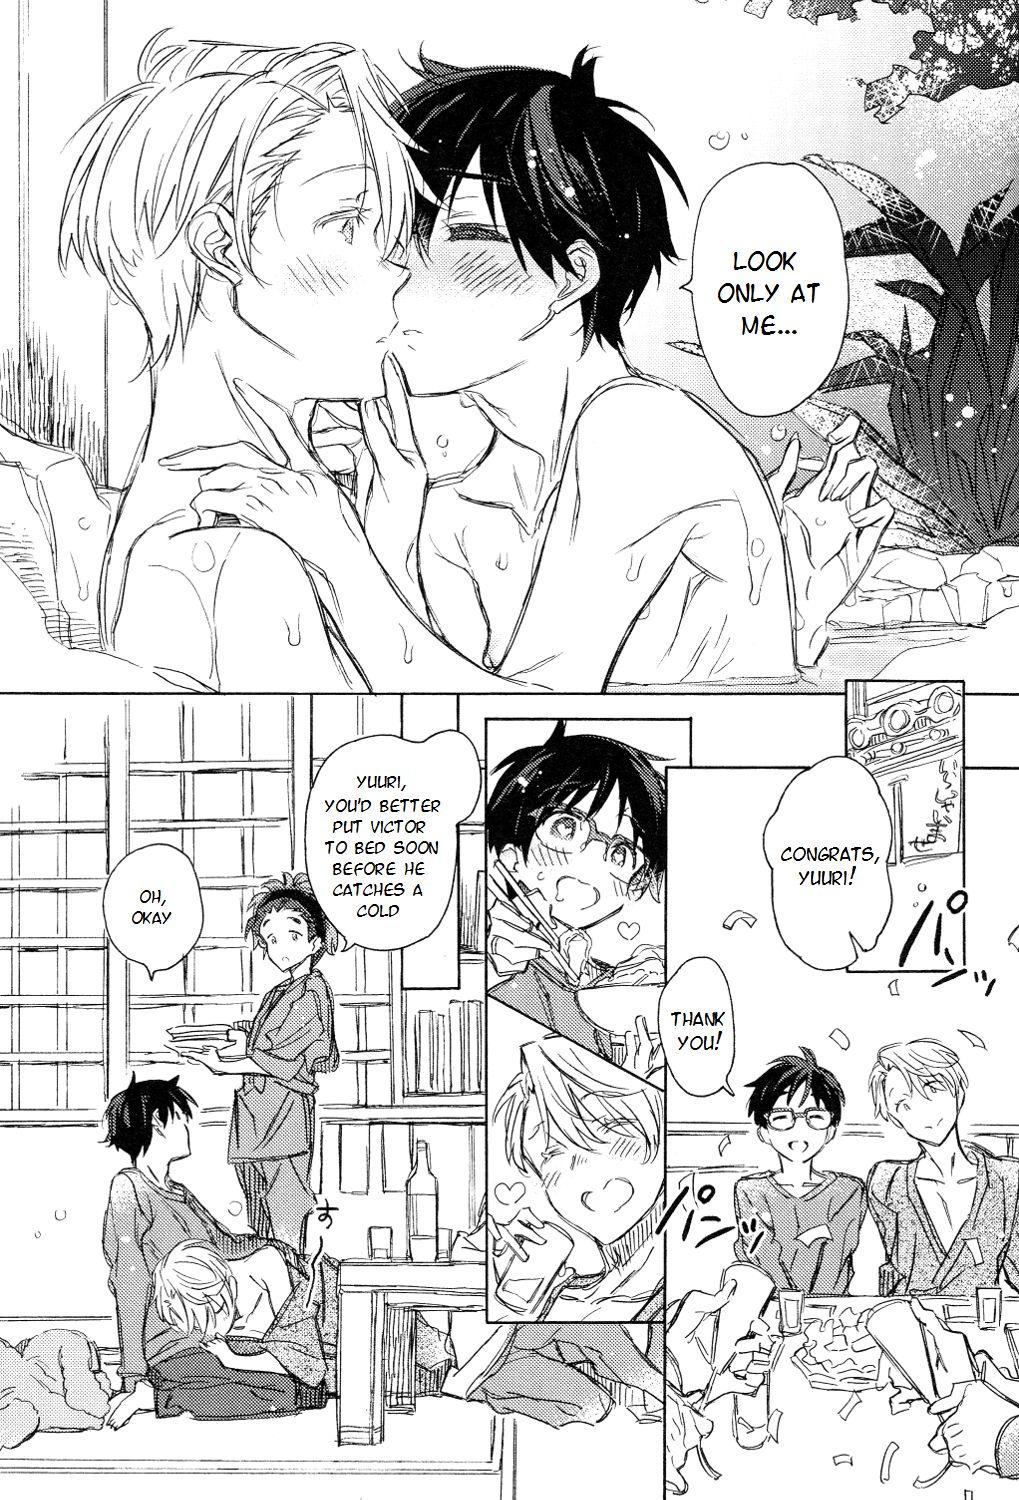 Tight Cunt BRAND NEW DAY,BRAND NEW LIFE - Yuri on ice Vadia - Page 6